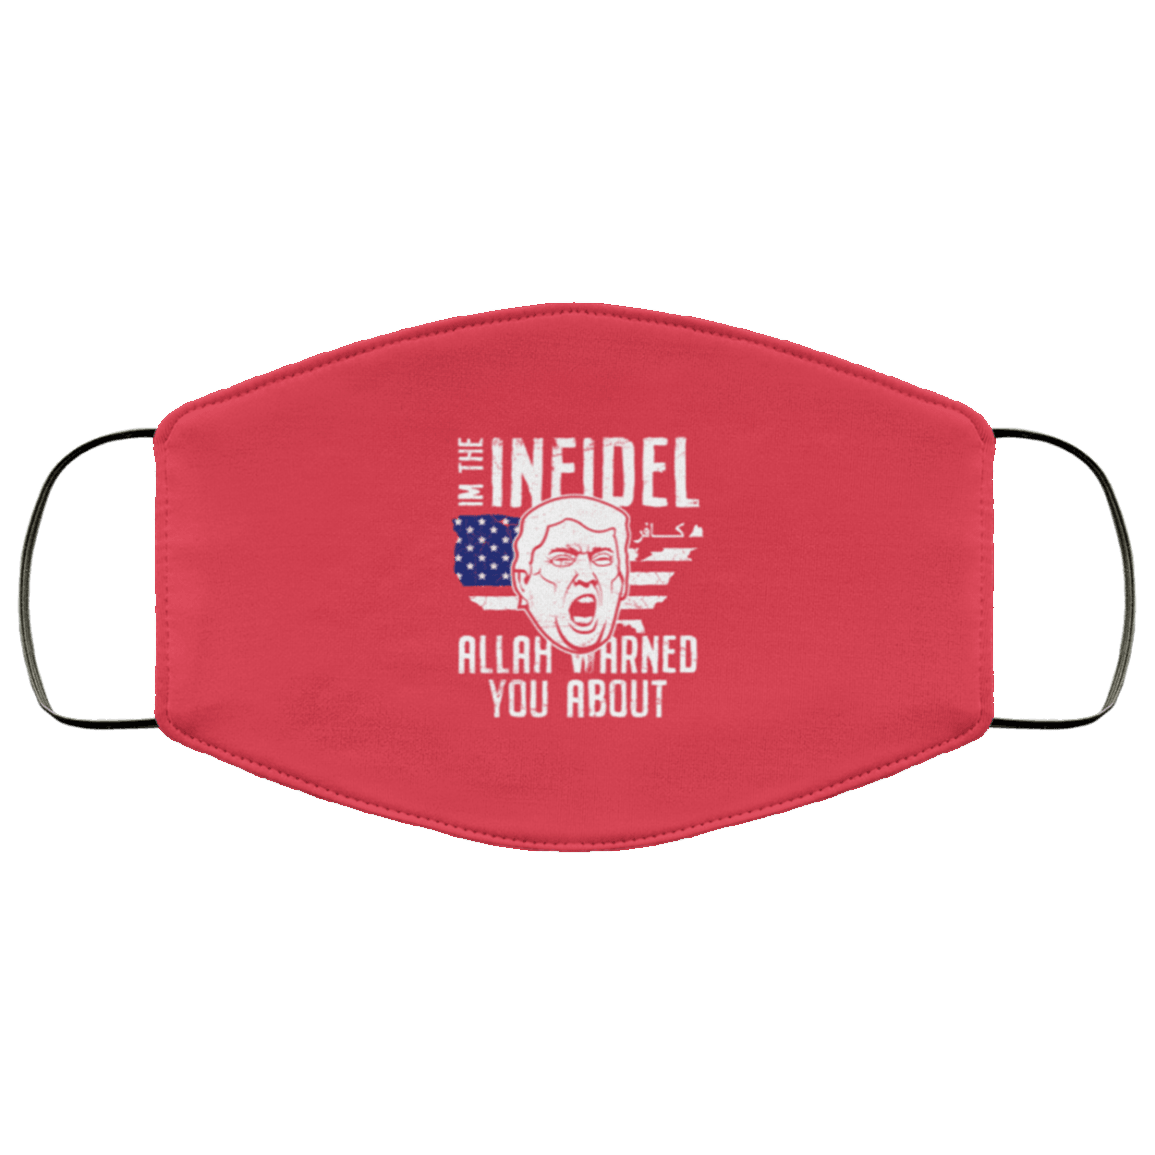 Designs by MyUtopia Shout Out:Trump The Infidel Allah Warned You About Humor Adult Fabric Face Mask with Elastic Ear Loops,3 Layer Fabric Face Mask / Red / Adult,Fabric Face Mask